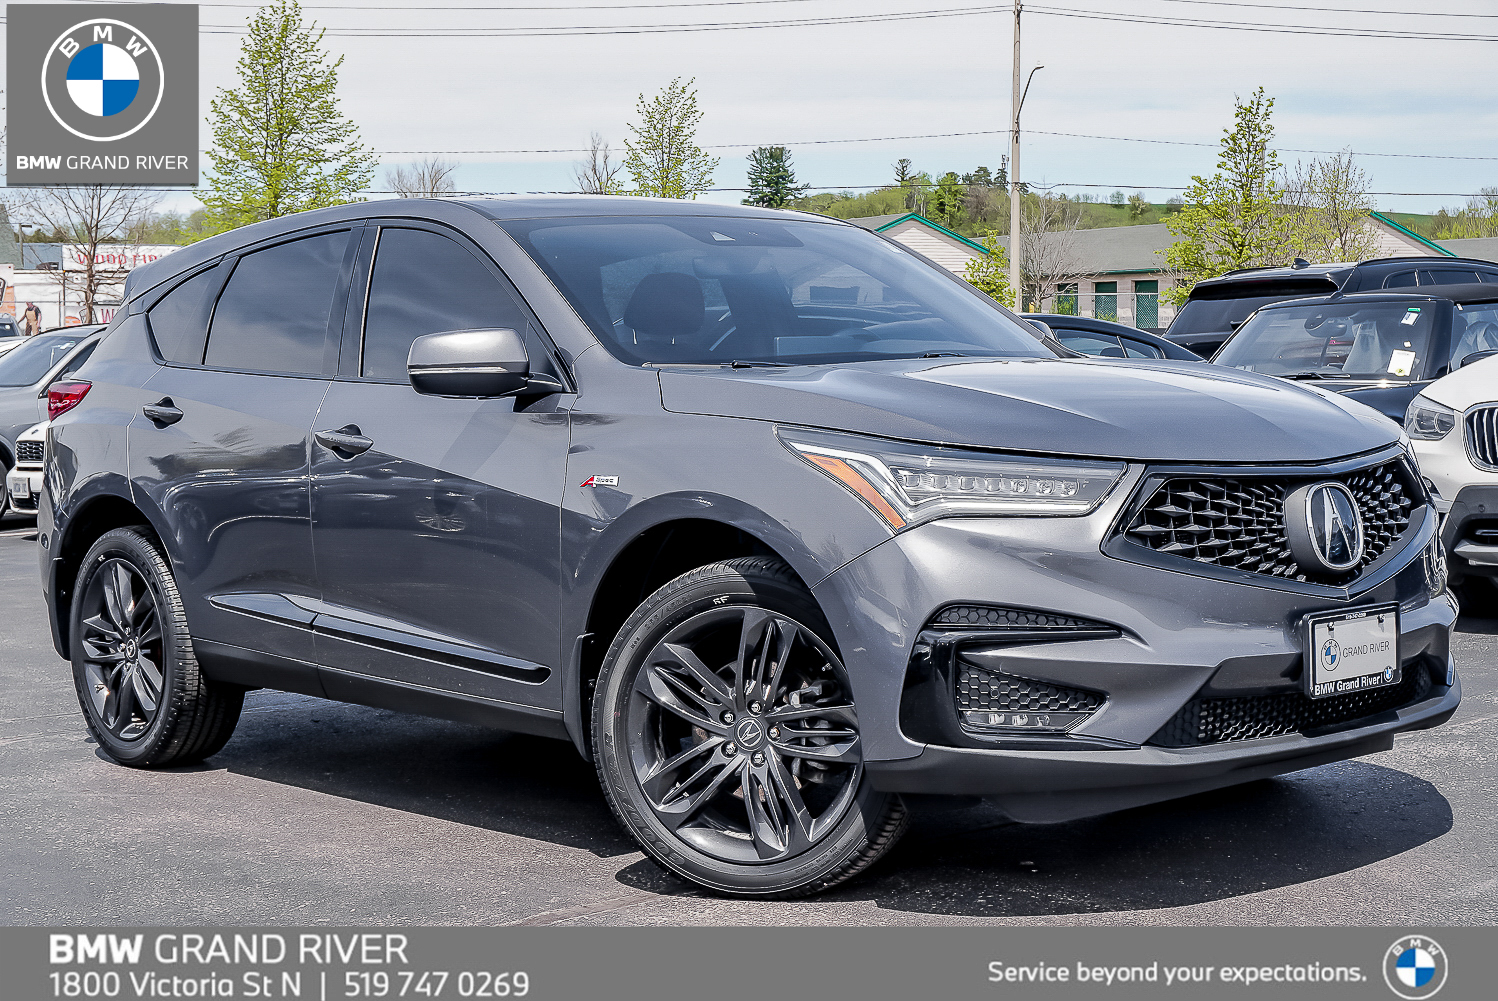 2021 Acura RDX JUST ARRIVED | PICTURES TO COME SOON |